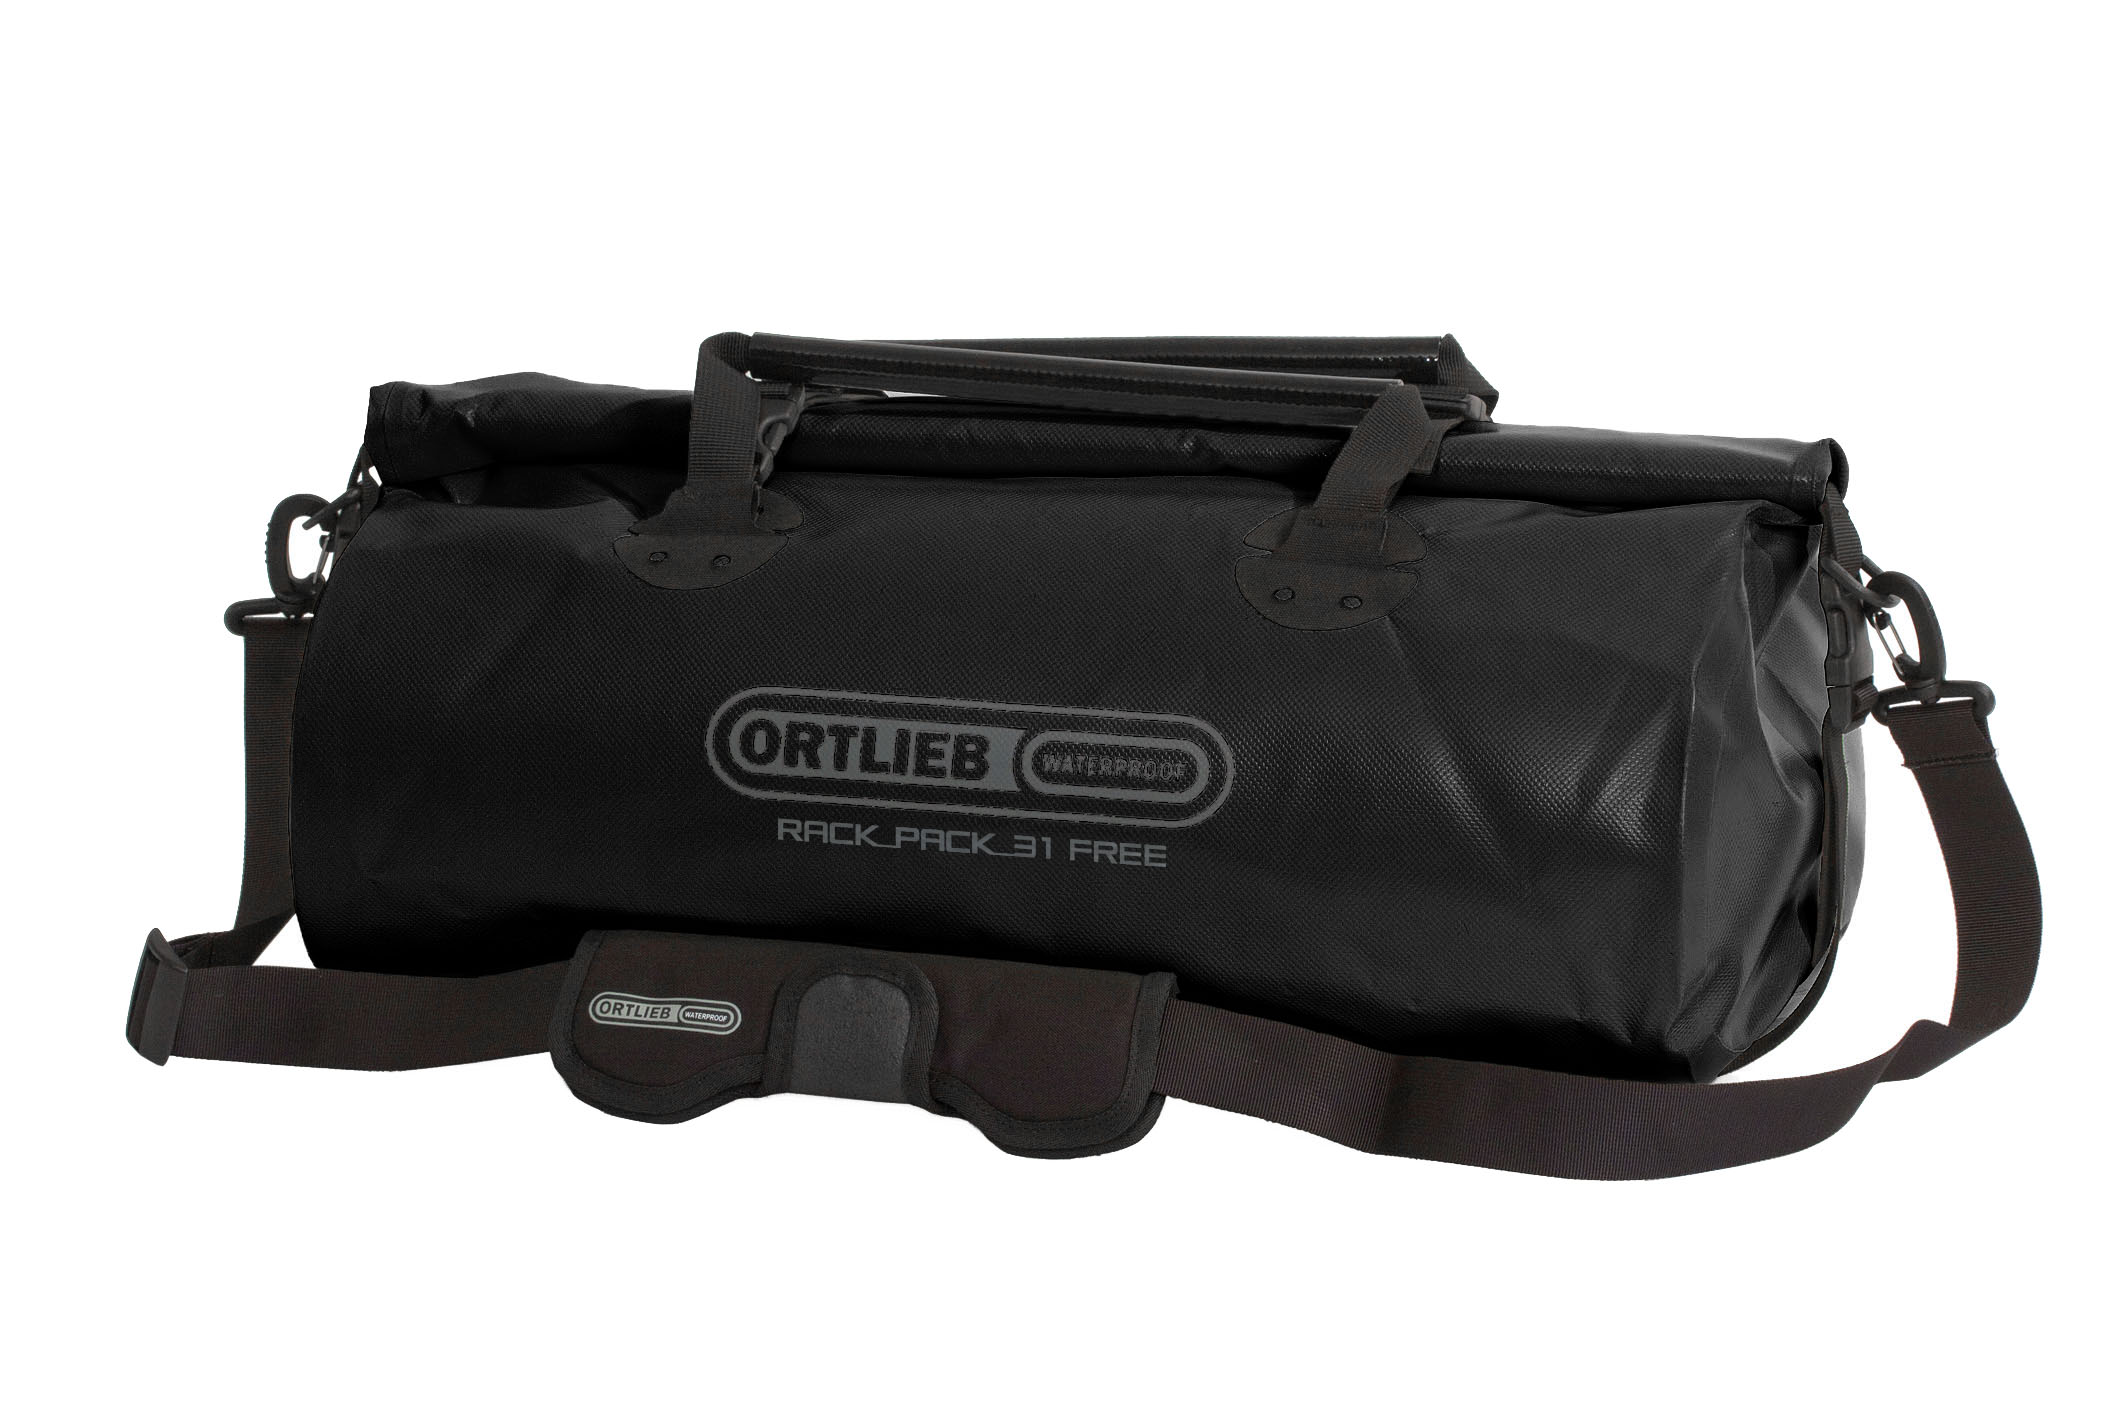 Ortlieb Rack-Pack Free - Abbotsford Cycles